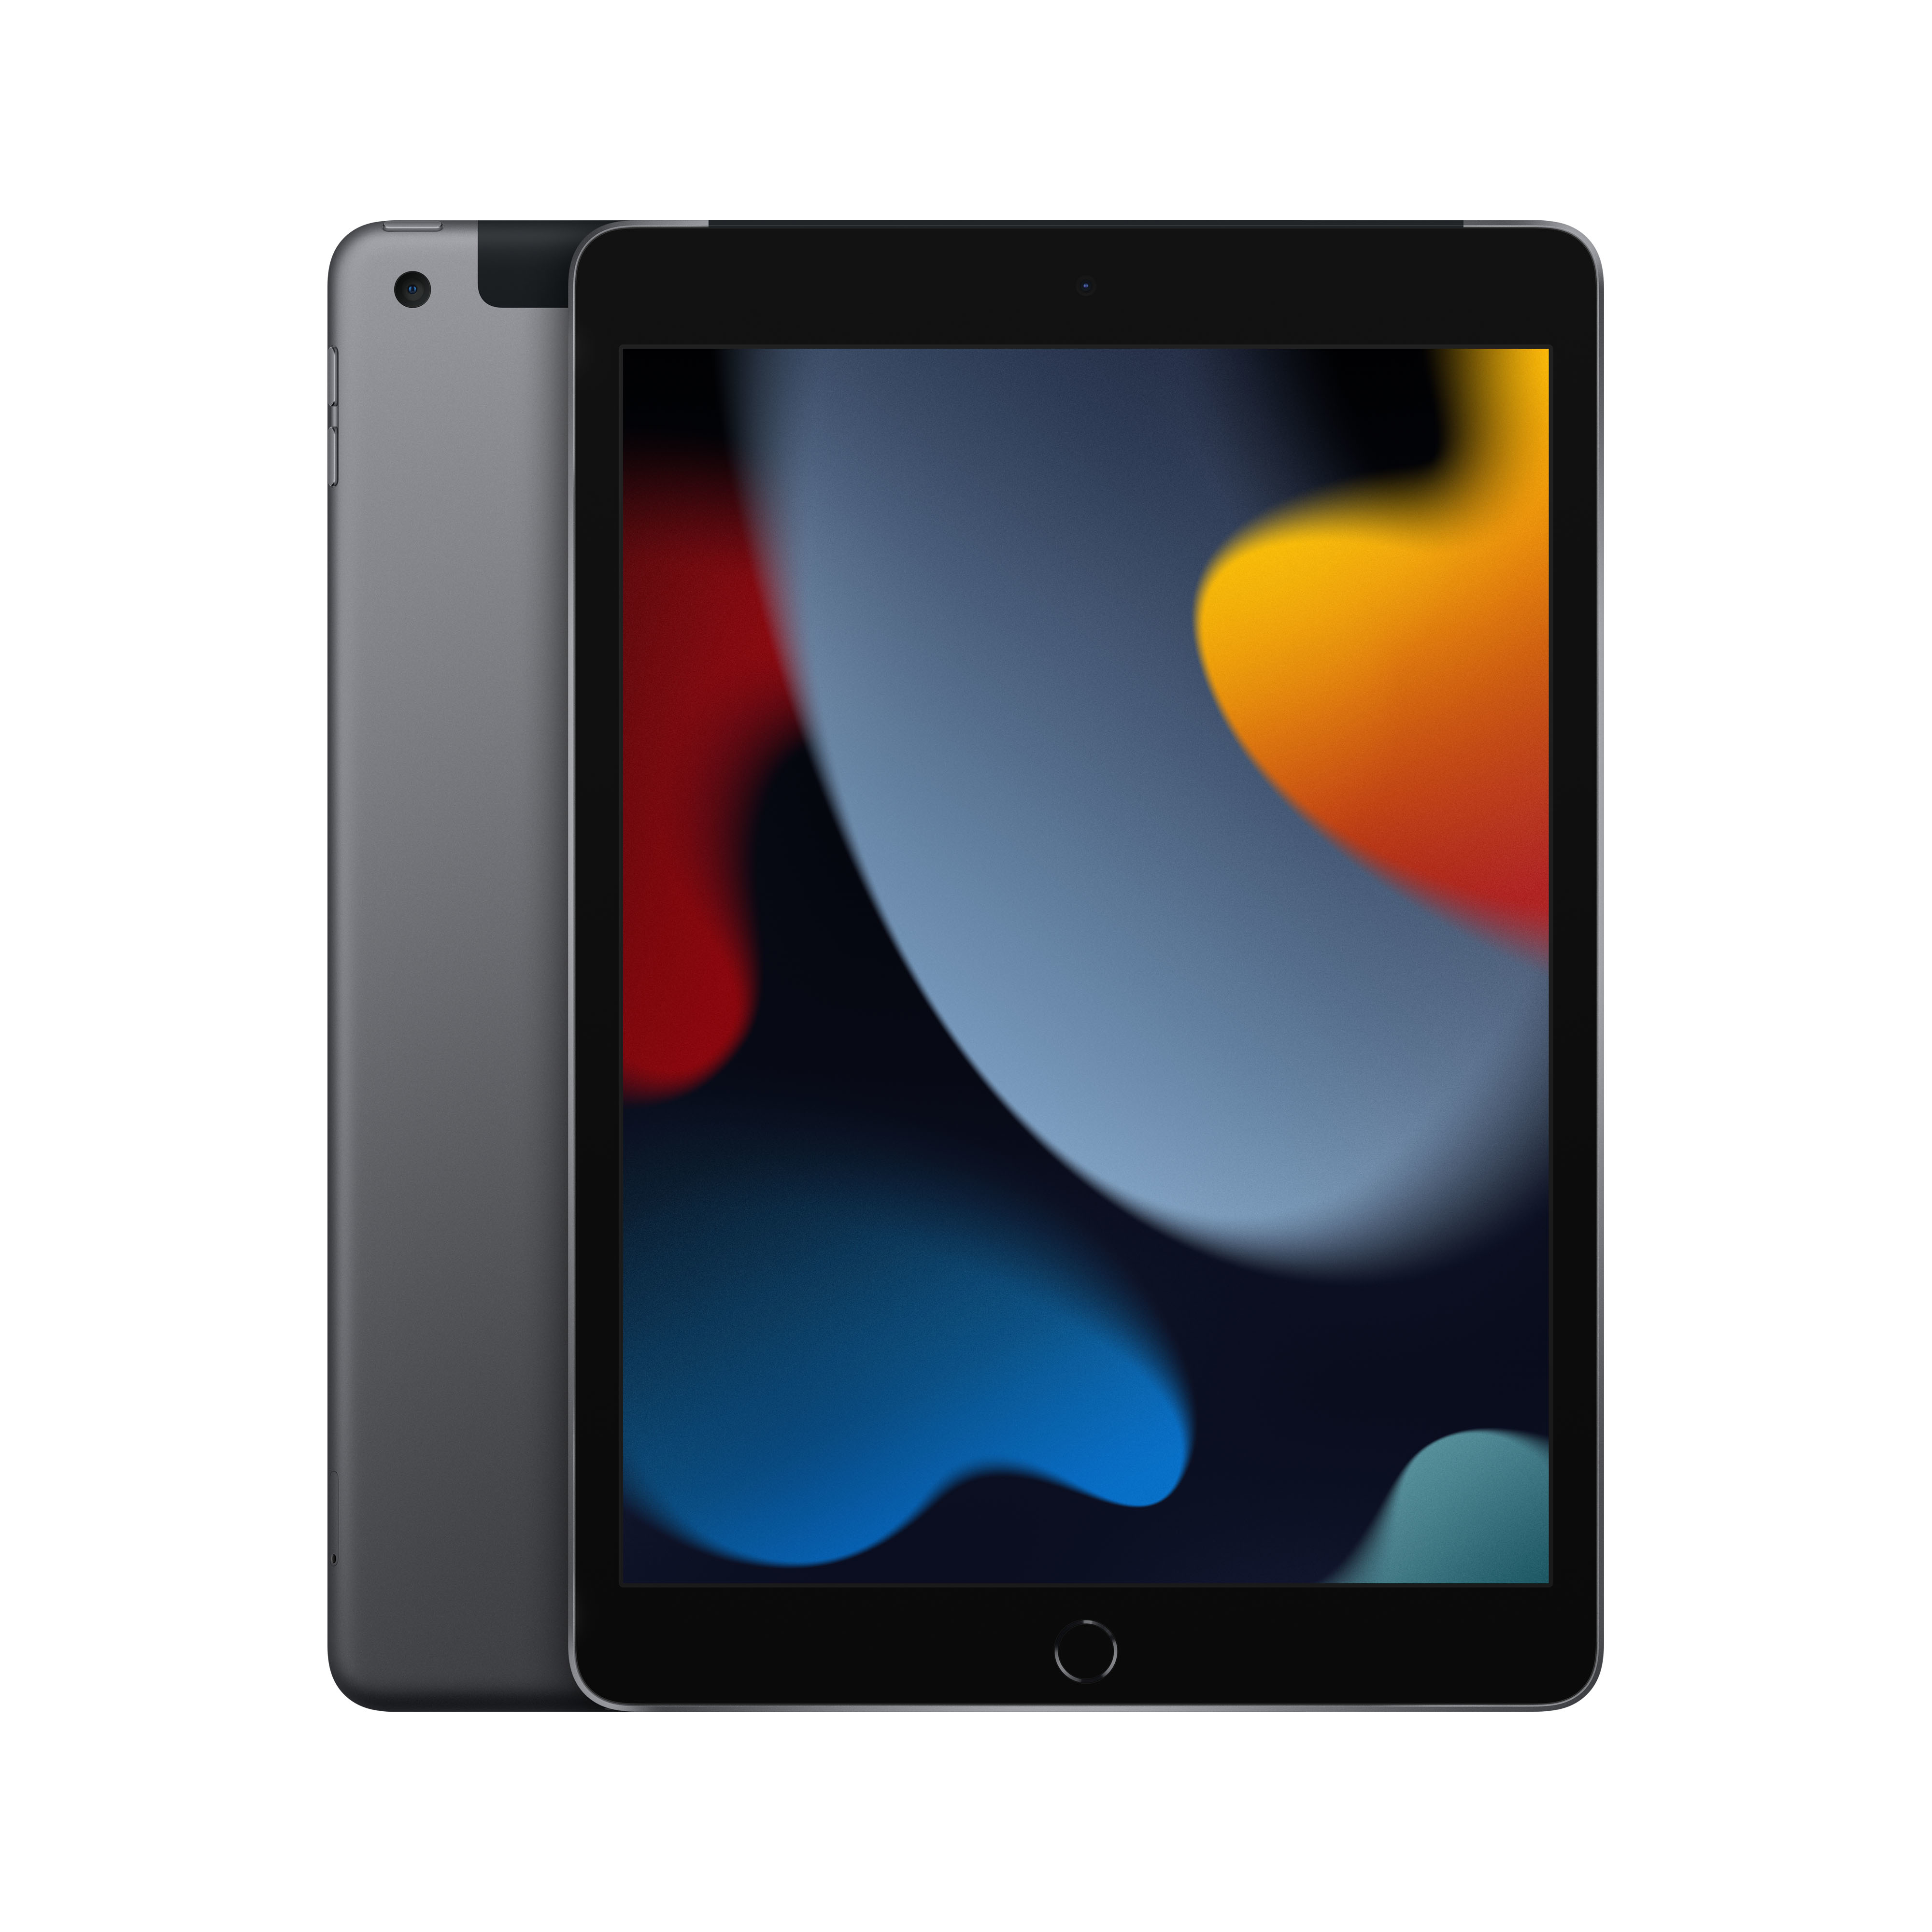 TABLET IPAD 10.2 256G WIFI-CELL SP ACE GRAY 2021